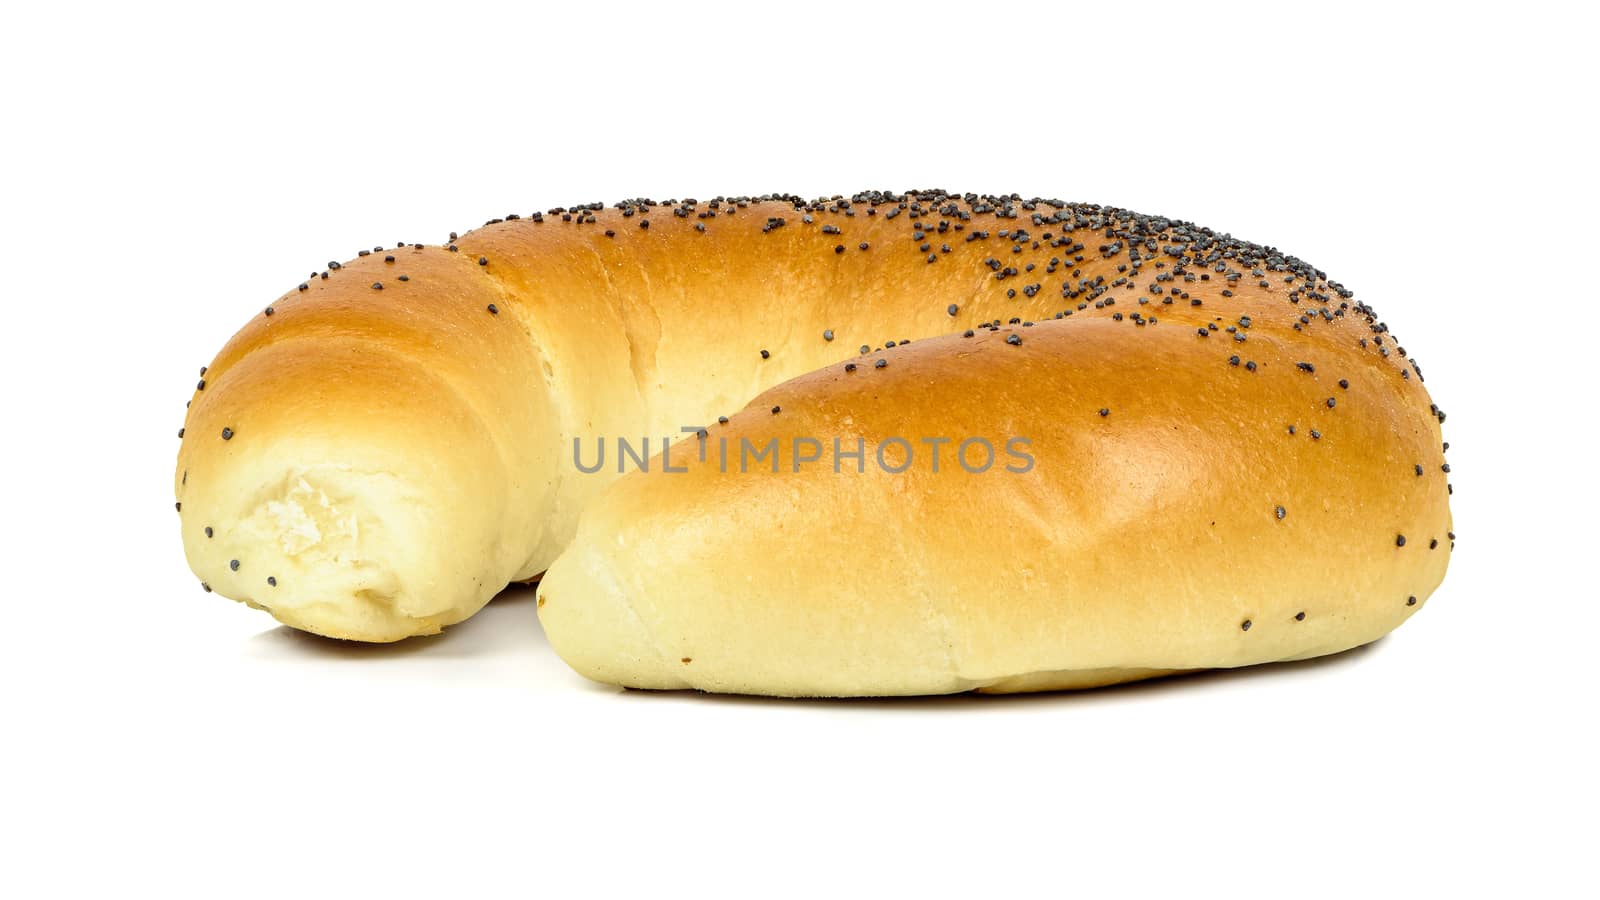 Crescent roll with poppy seeds on white background by mkos83